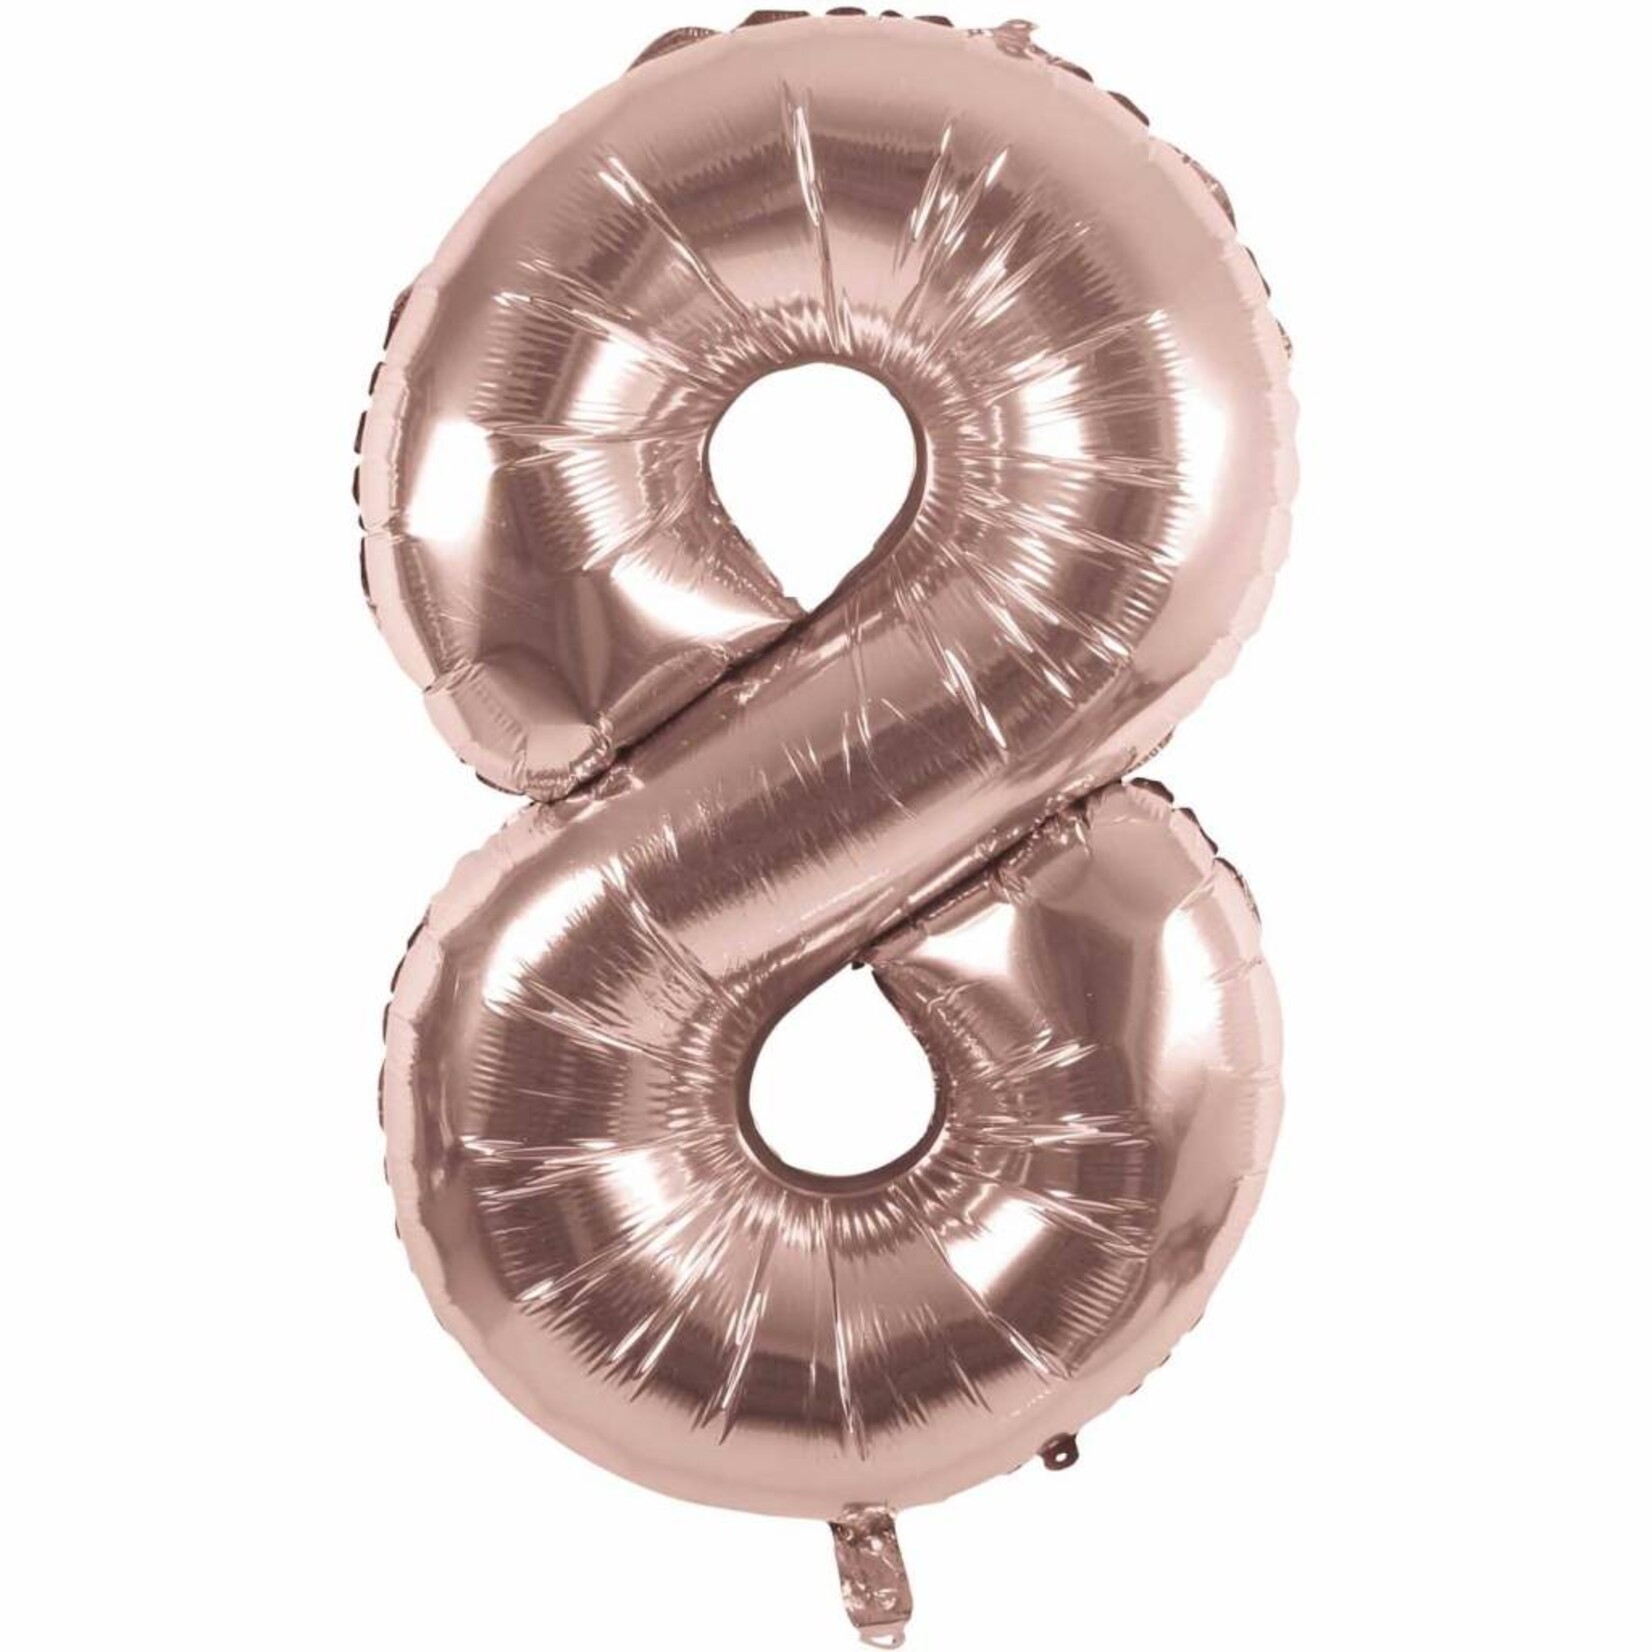 RICO Foil numberballoon small rose gold 8